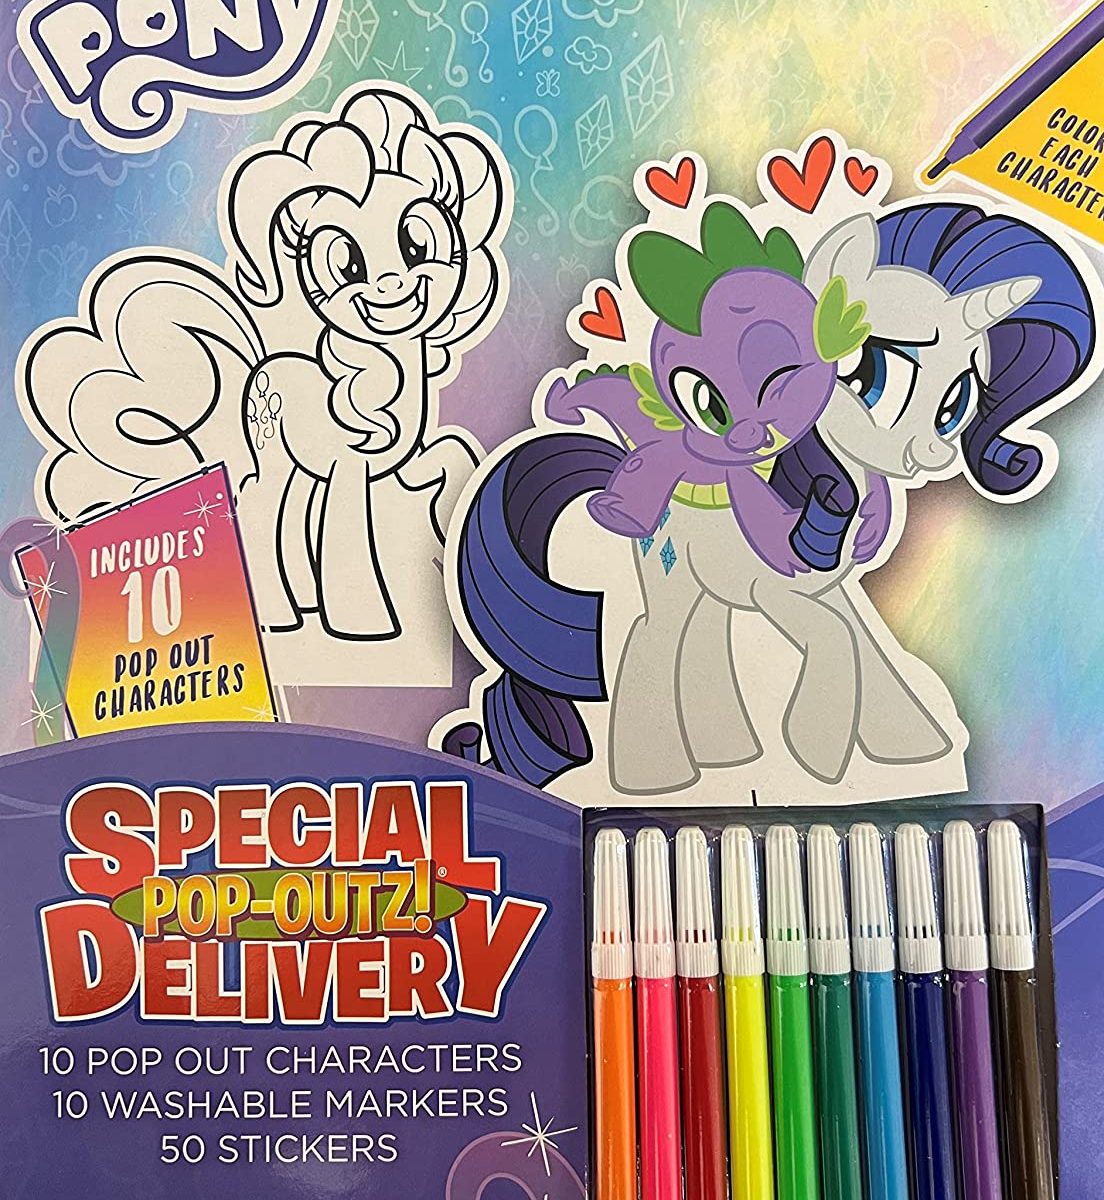 MLP Coloring Kit Pop-Outz and Activity Play Set 1